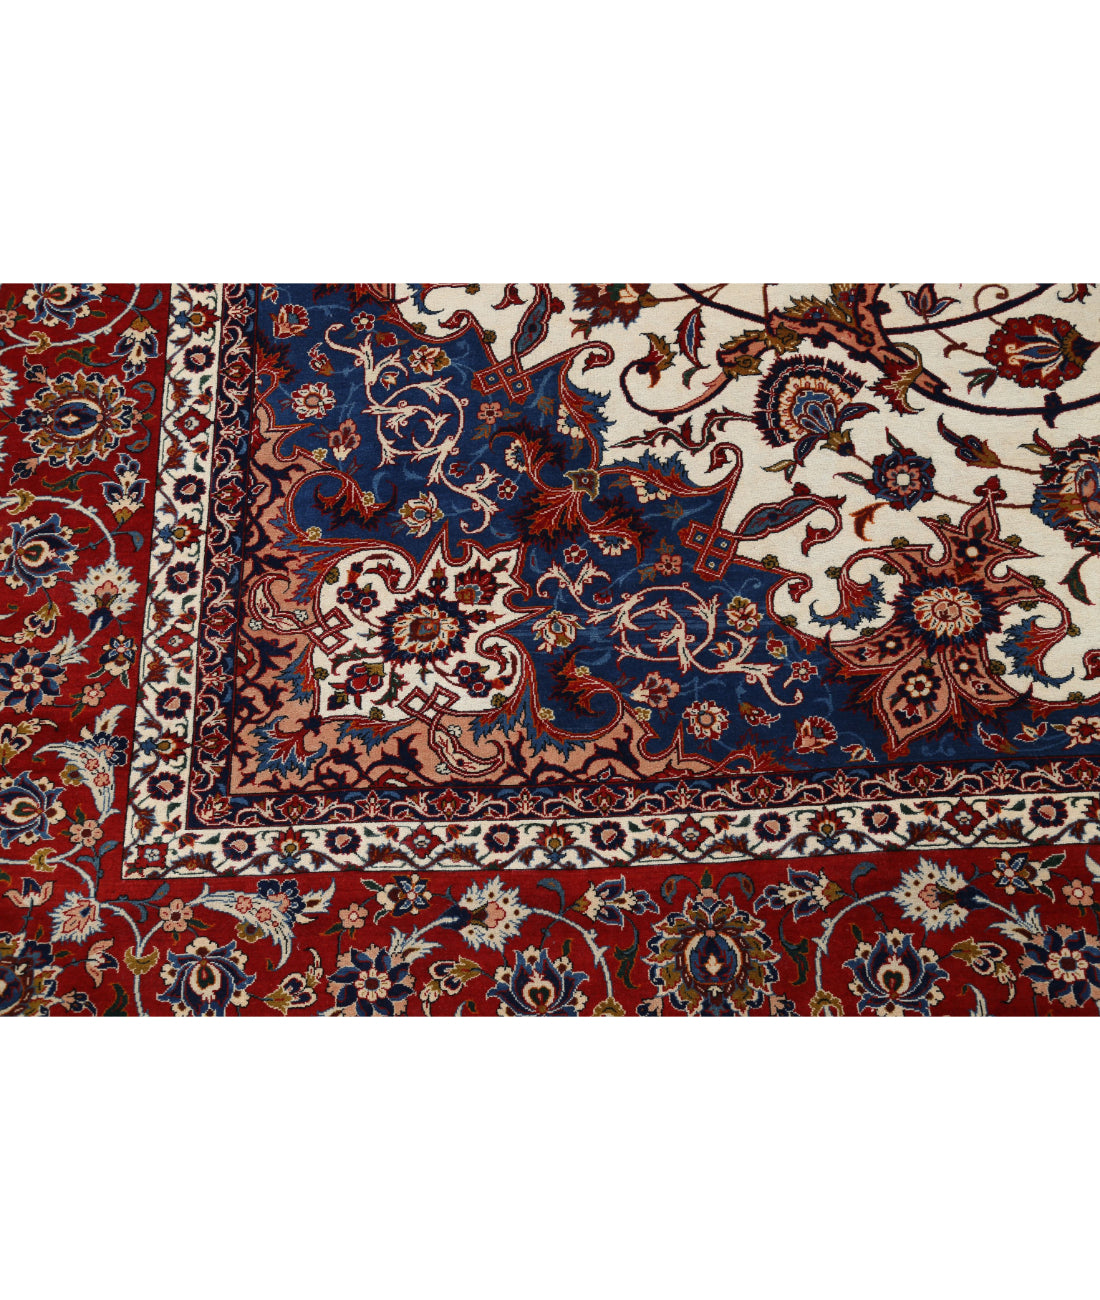 Hand Knotted Masterpiece Persian Isfahan Wool Rug - 10'3'' x 14'7'' 10'3'' x 14'7'' (308 X 438) / Ivory / Red